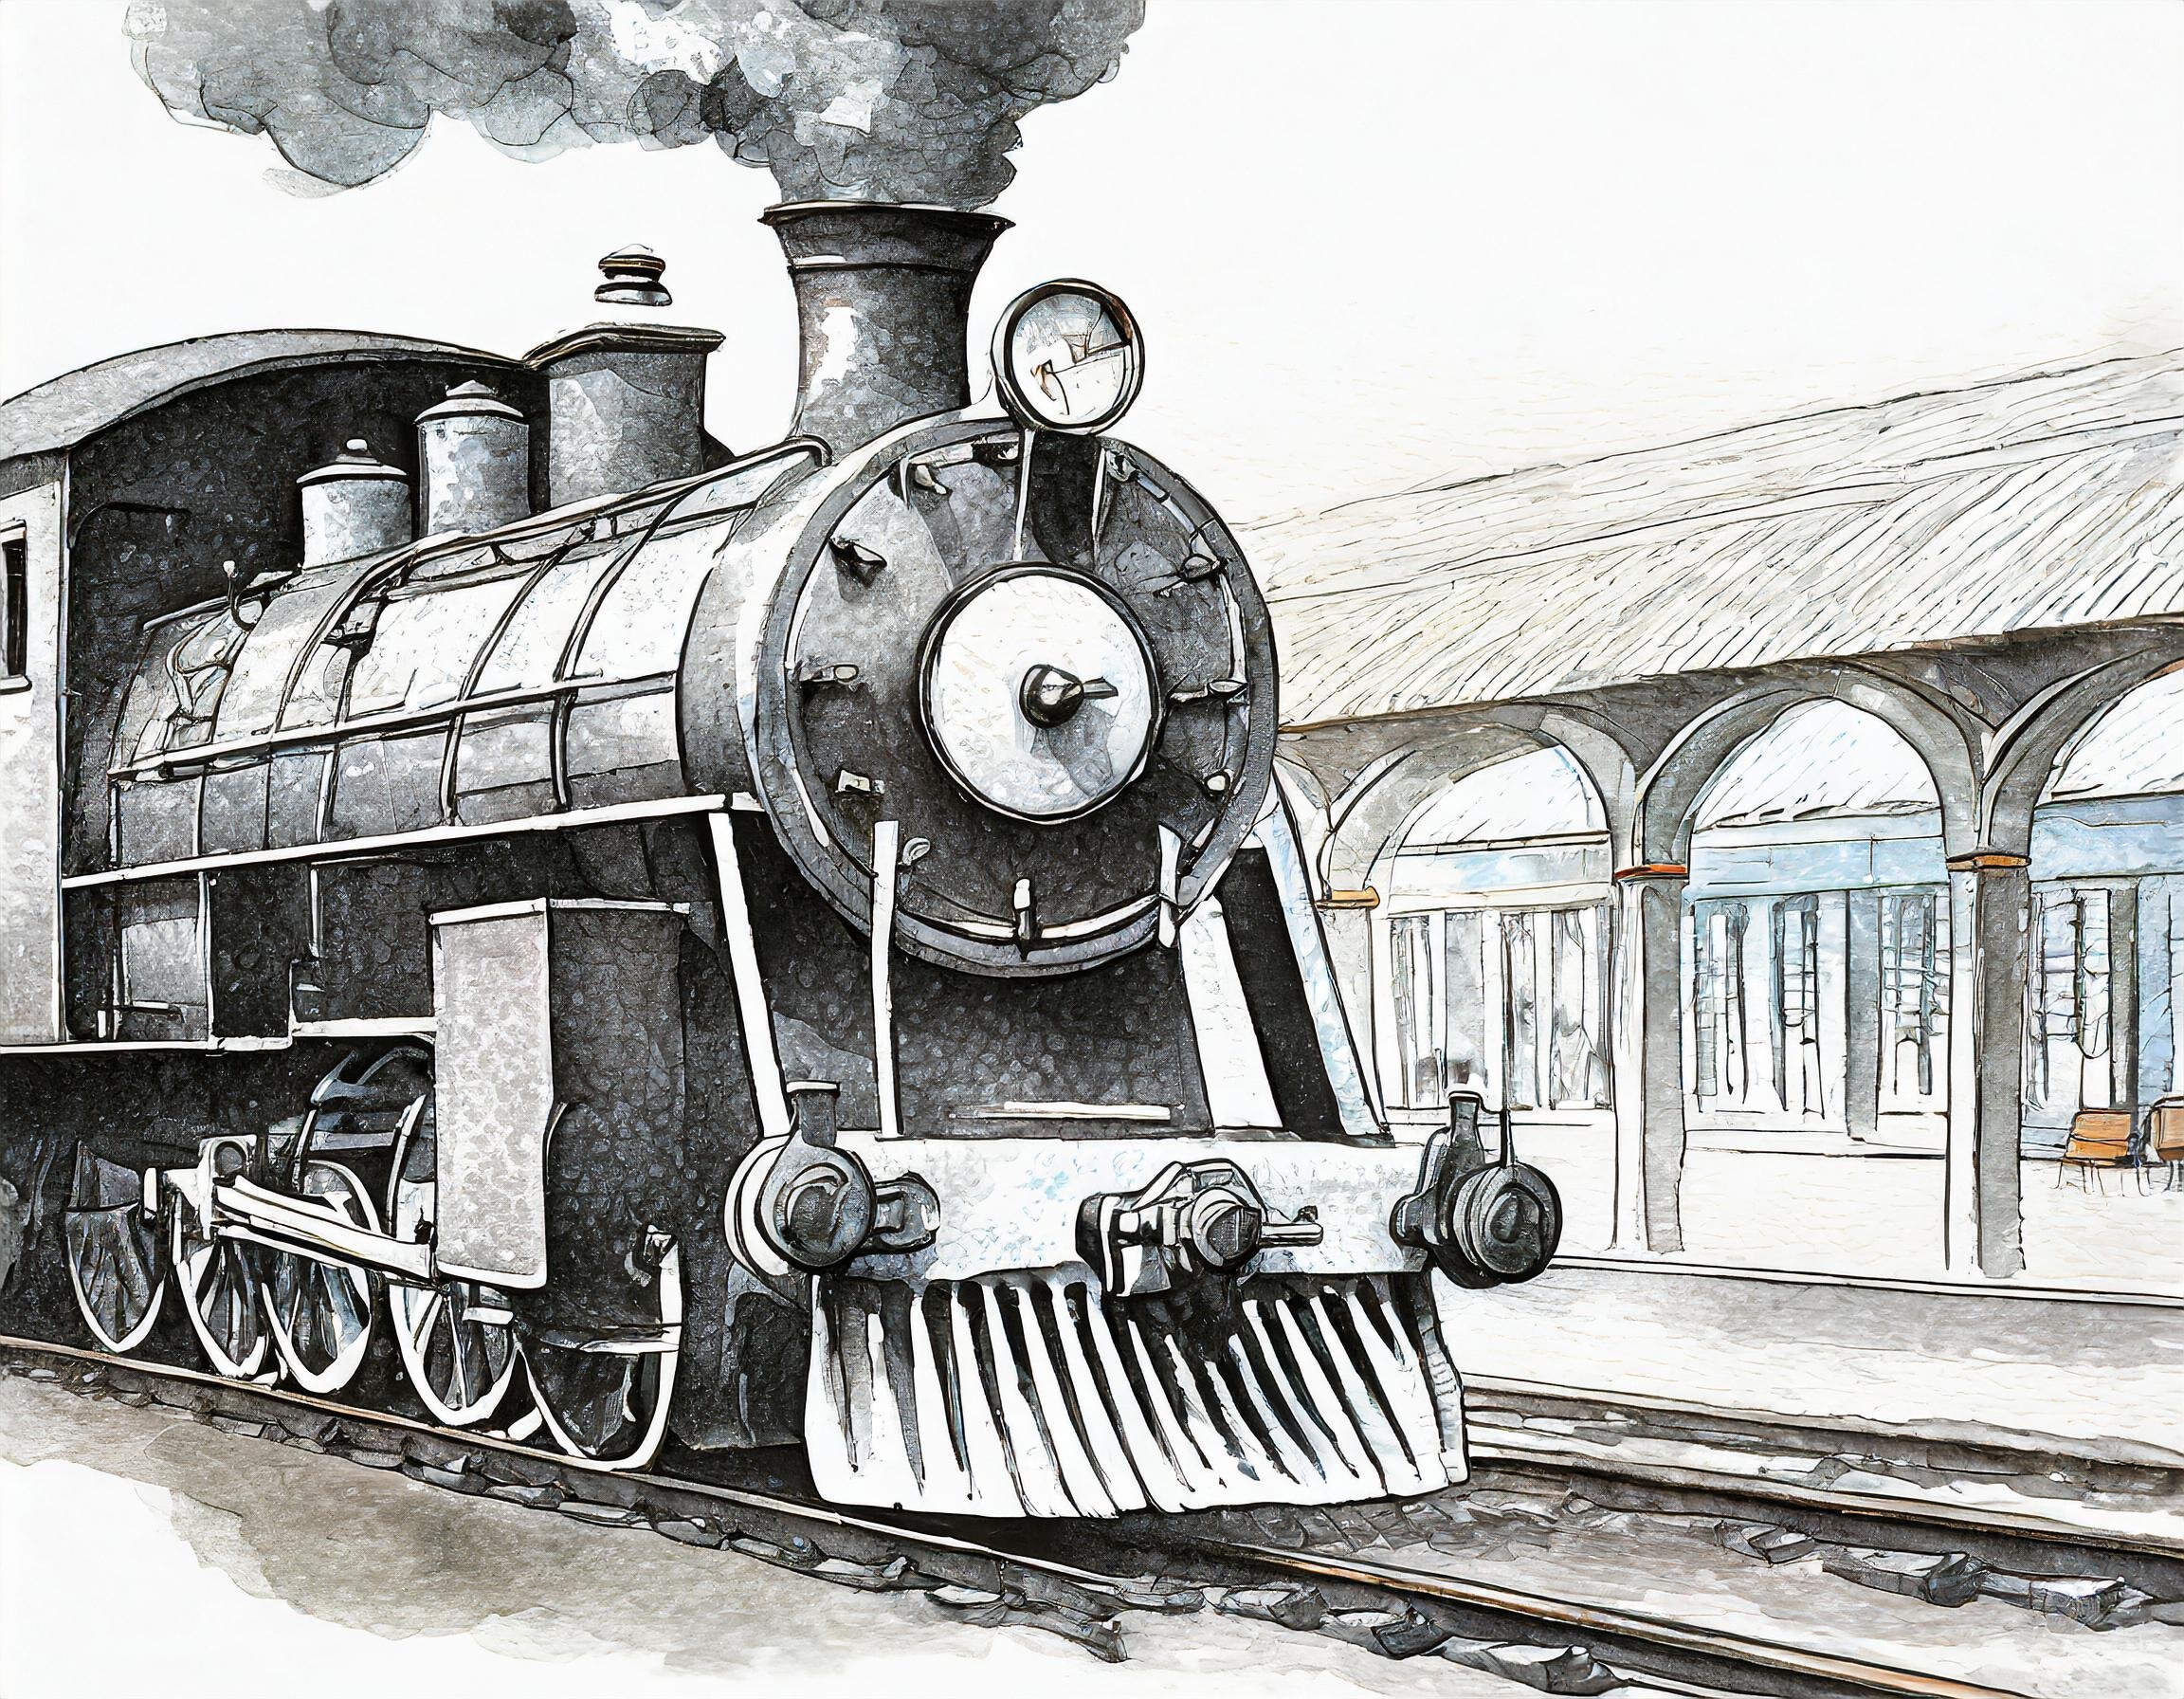 Sketch in black and white, late thirties of the twentieth century, railroad steam locomotive with wagon wheels - 1930s, in a station